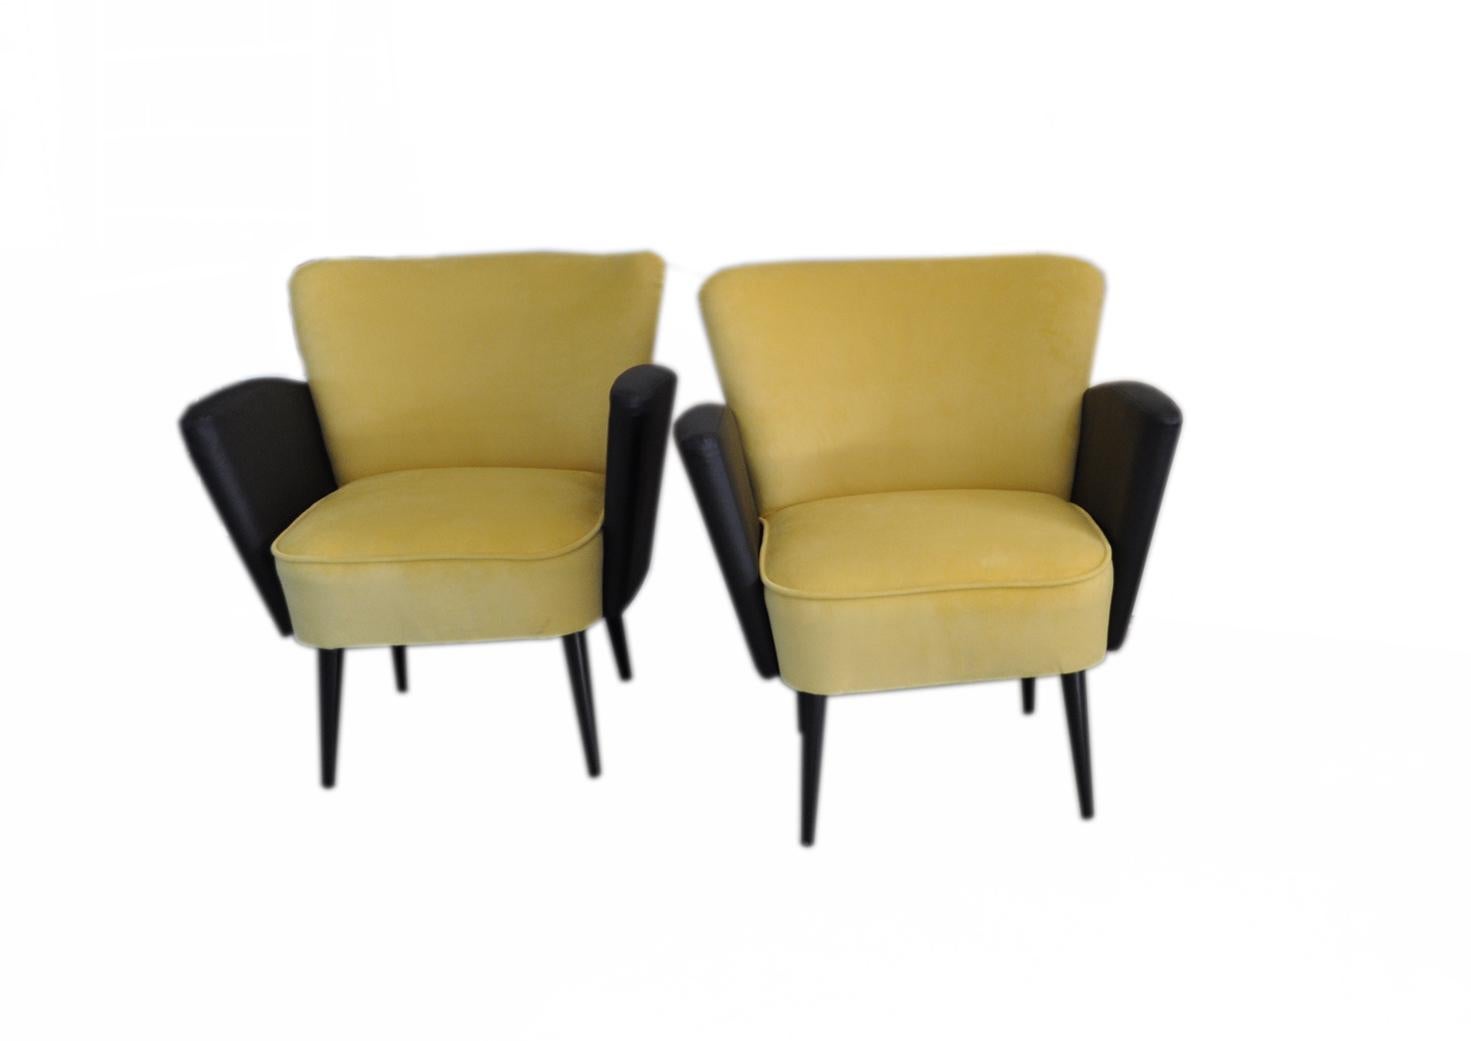 Mid-20th Century 1950s Cocktail Chairs, Pair For Sale